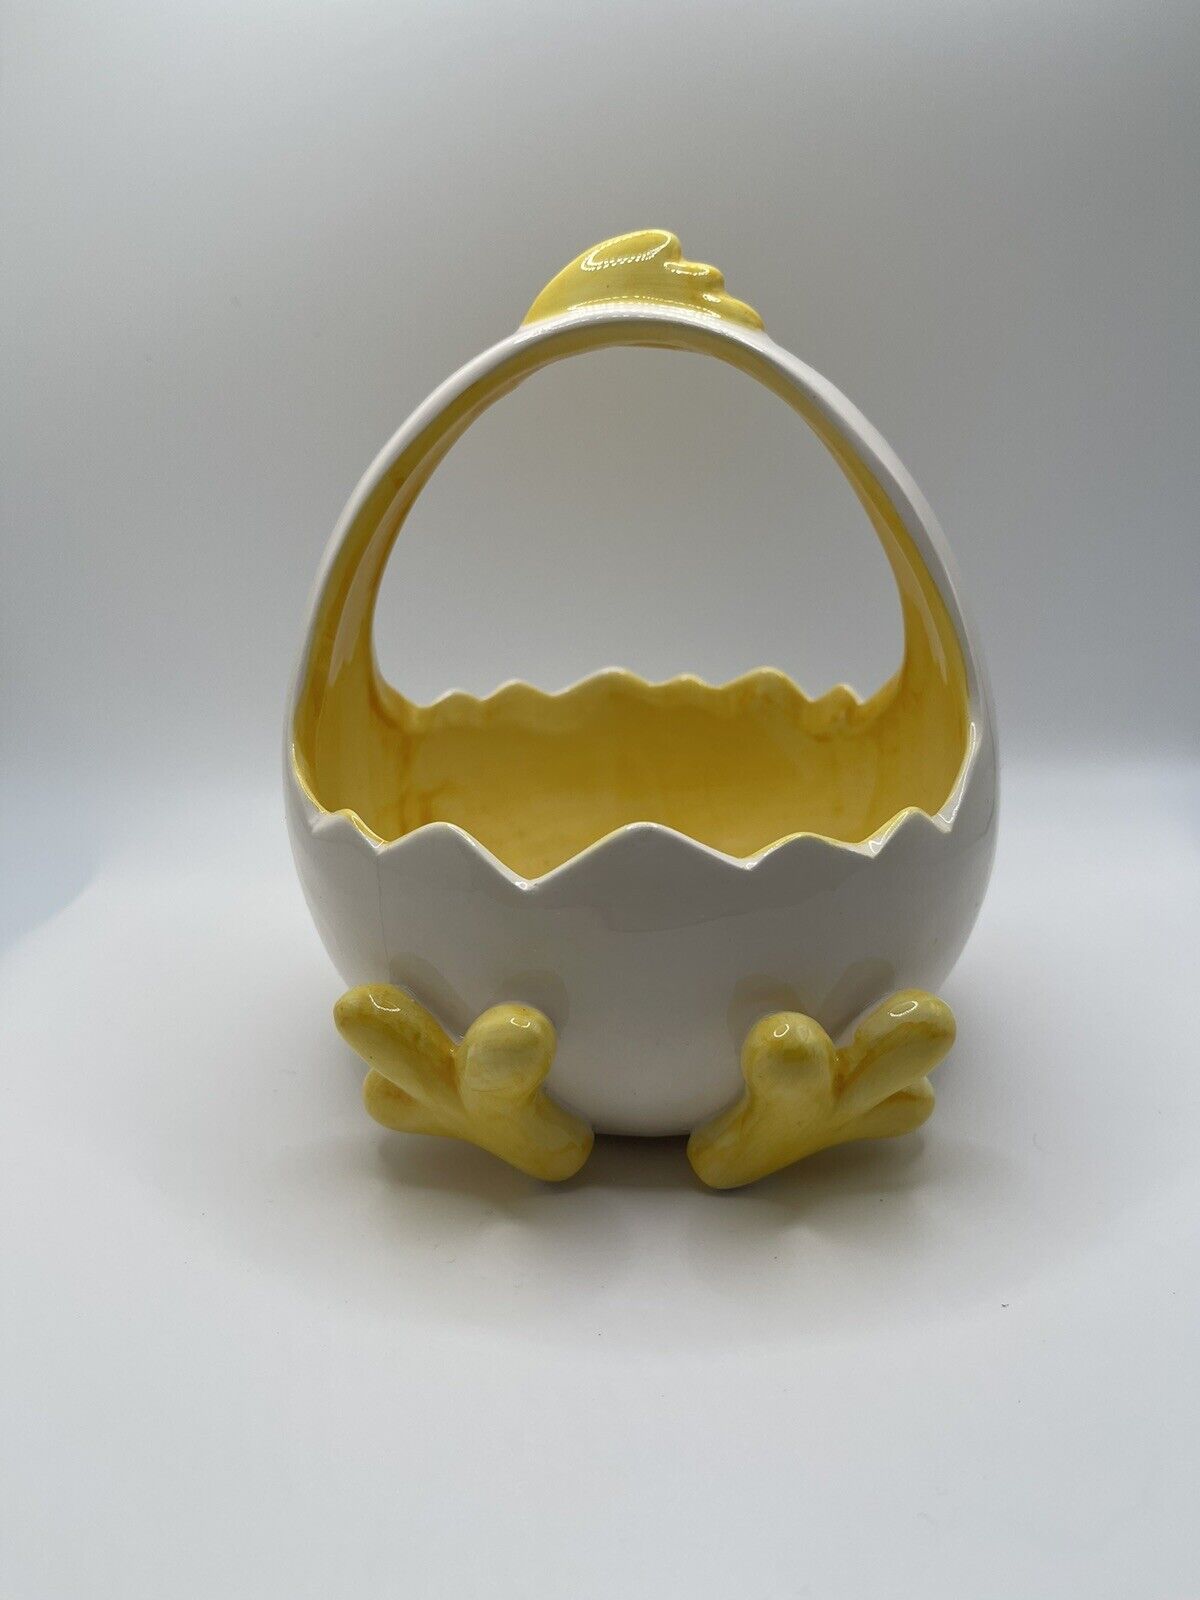 Cracked Egg Chick Feet Easter Spring Candy Basket Bowl Dish CUTE